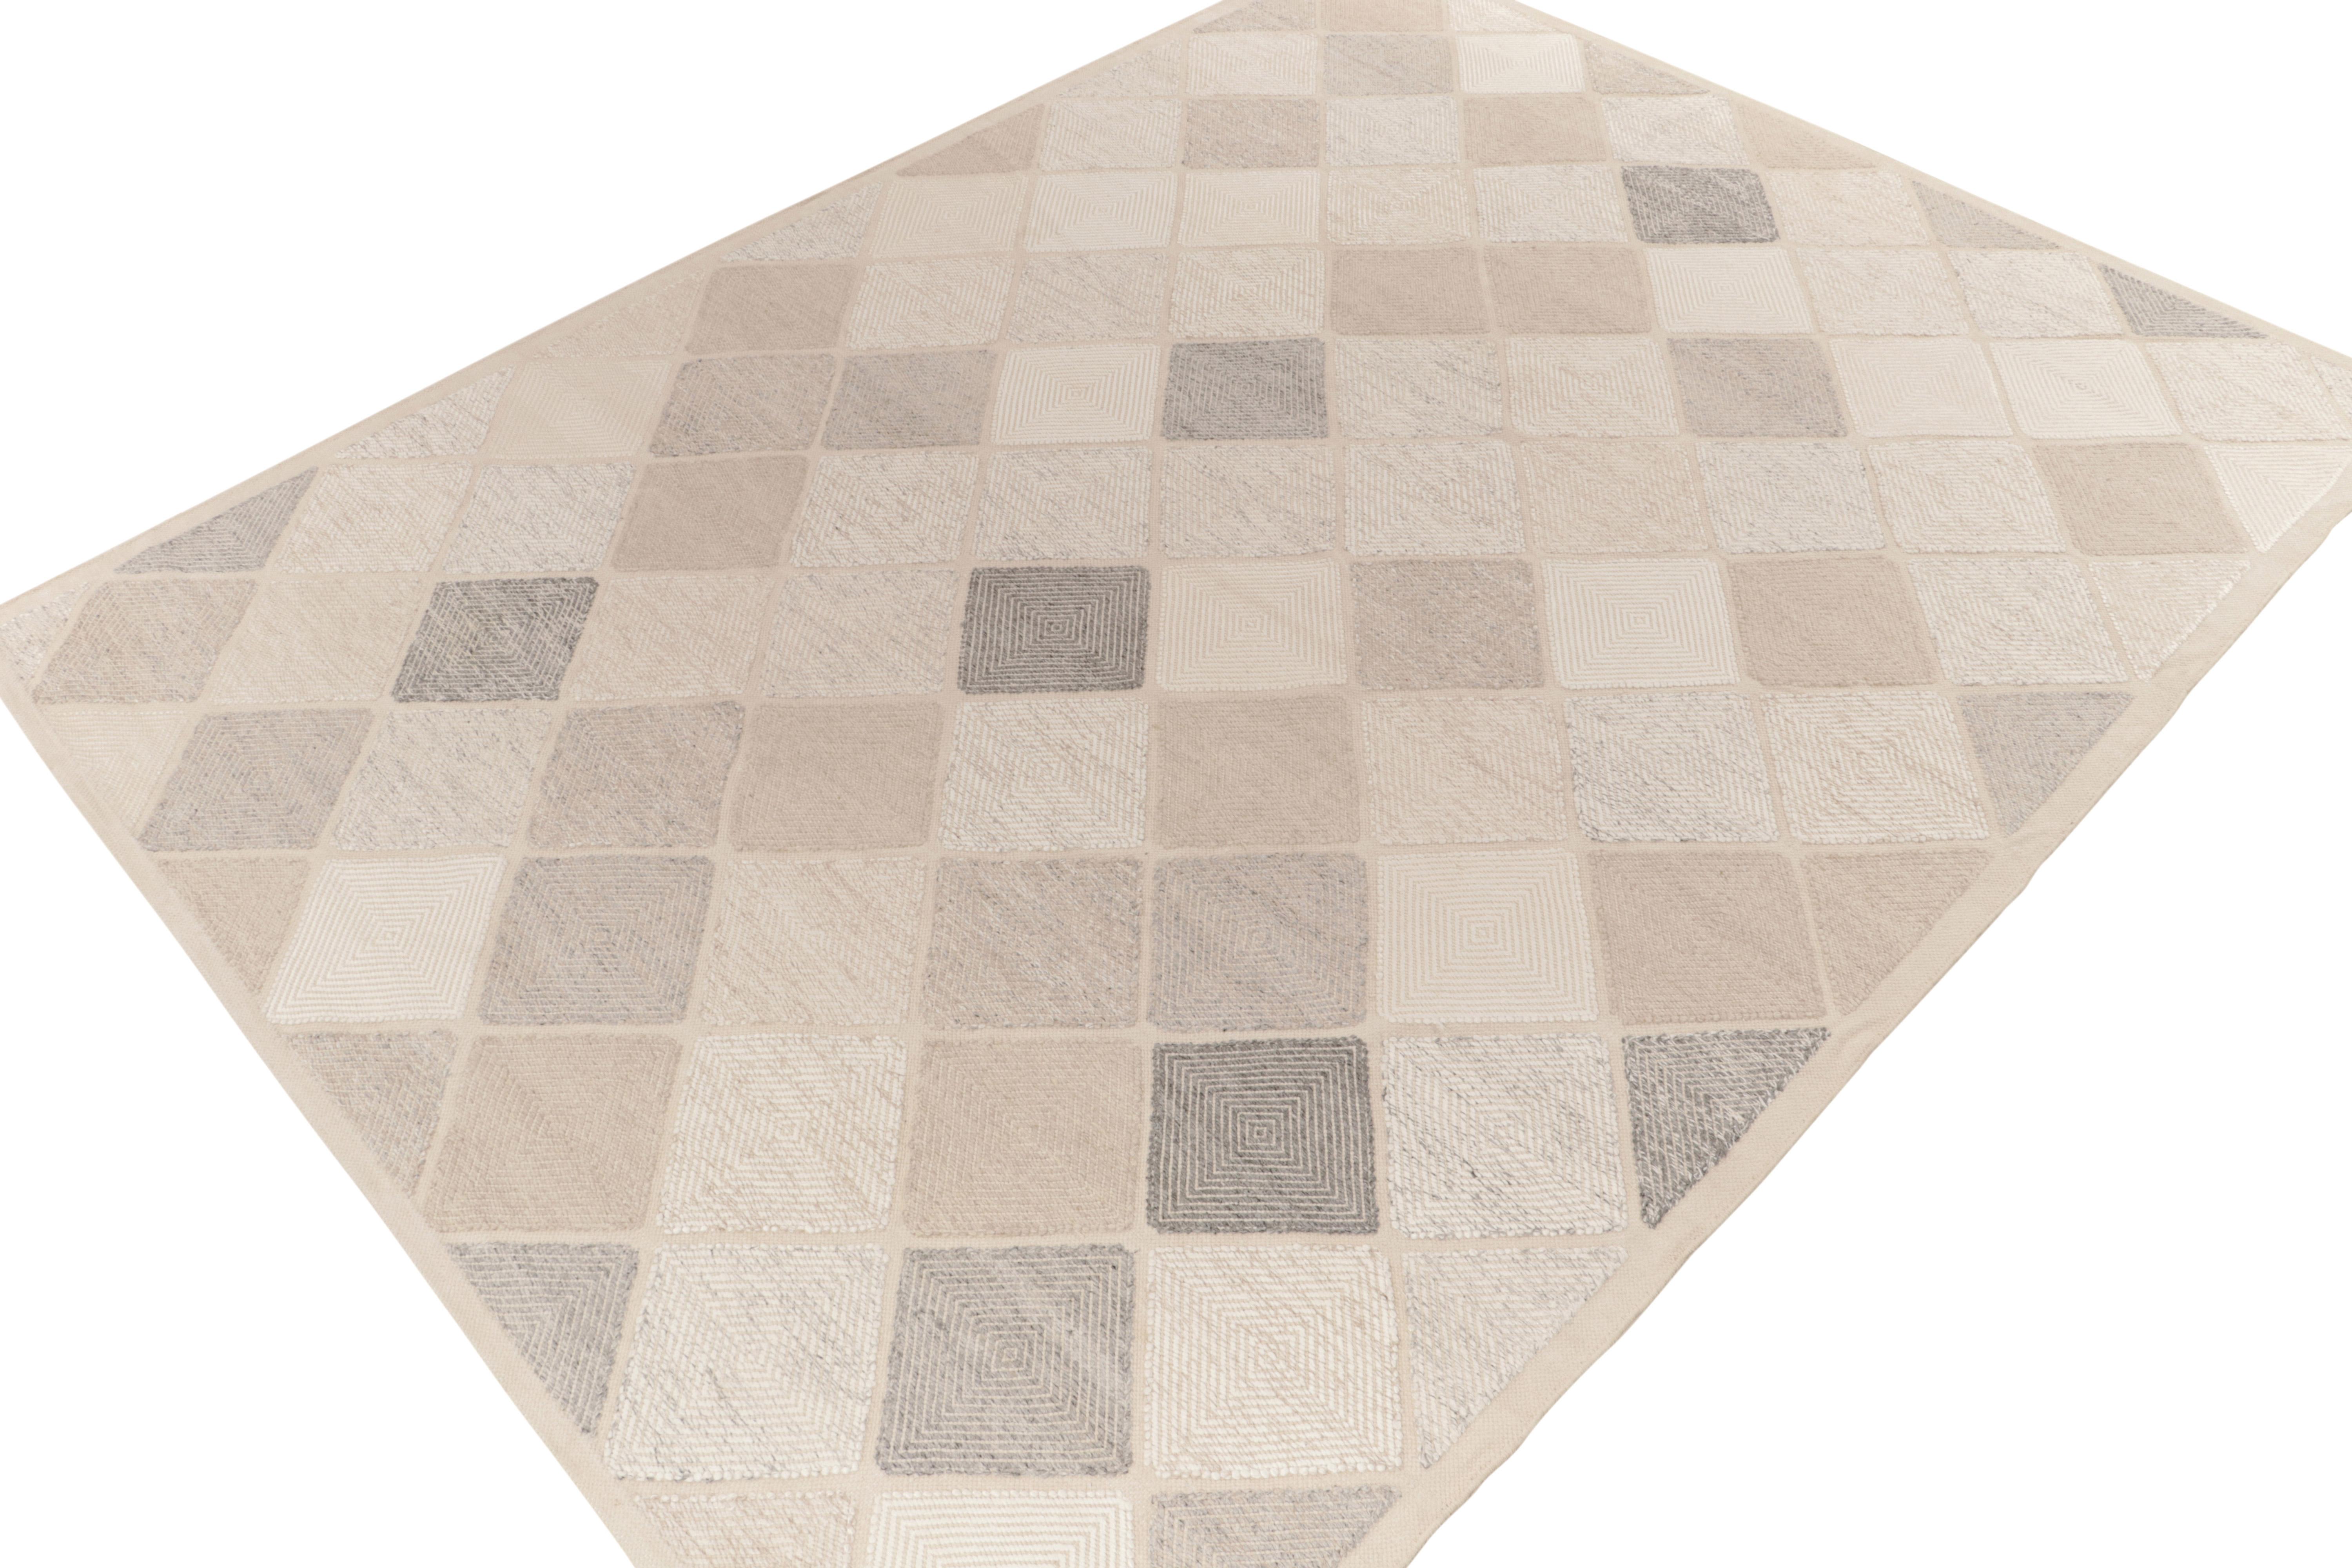 Rug & Kilim presents this exquisite 10x14 Scandinavian kilim from the Morocco line of the award-winning flat weave texture. The handwoven piece flows in an all over half diamond pattern in a delightful blend of beige, stone blue, grey & white. The